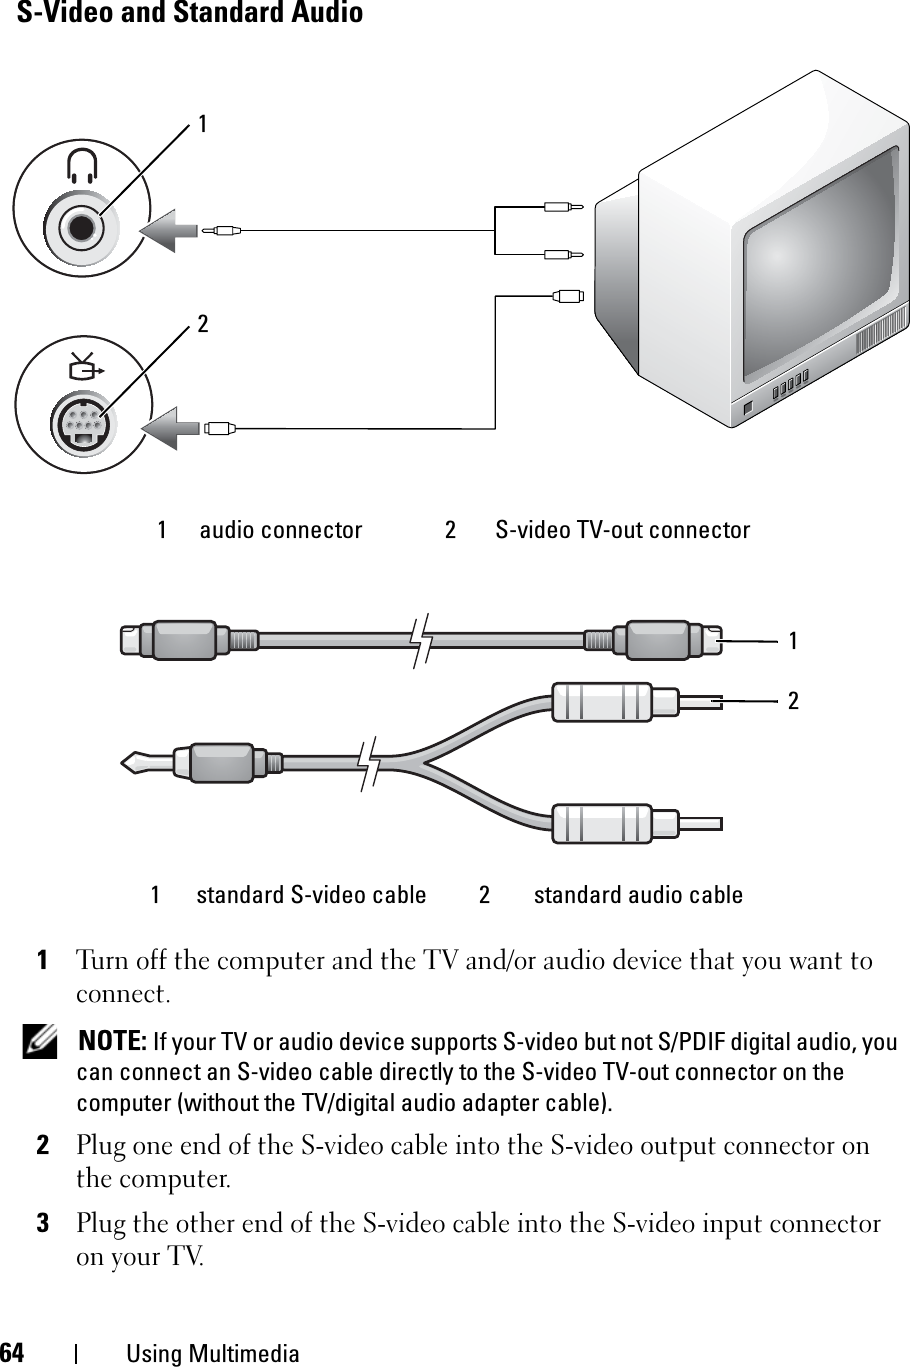 64 Using MultimediaS-Video and Standard Audio1Turn off the computer and the TV and/or audio device that you want to connect.NOTE: If your TV or audio device supports S-video but not S/PDIF digital audio, you can connect an S-video cable directly to the S-video TV-out connector on the computer (without the TV/digital audio adapter cable).2Plug one end of the S-video cable into the S-video output connector on the computer.3Plug the other end of the S-video cable into the S-video input connector on your TV.1 audio connector 2 S-video TV-out connector1 standard S-video cable 2 standard audio cable1212